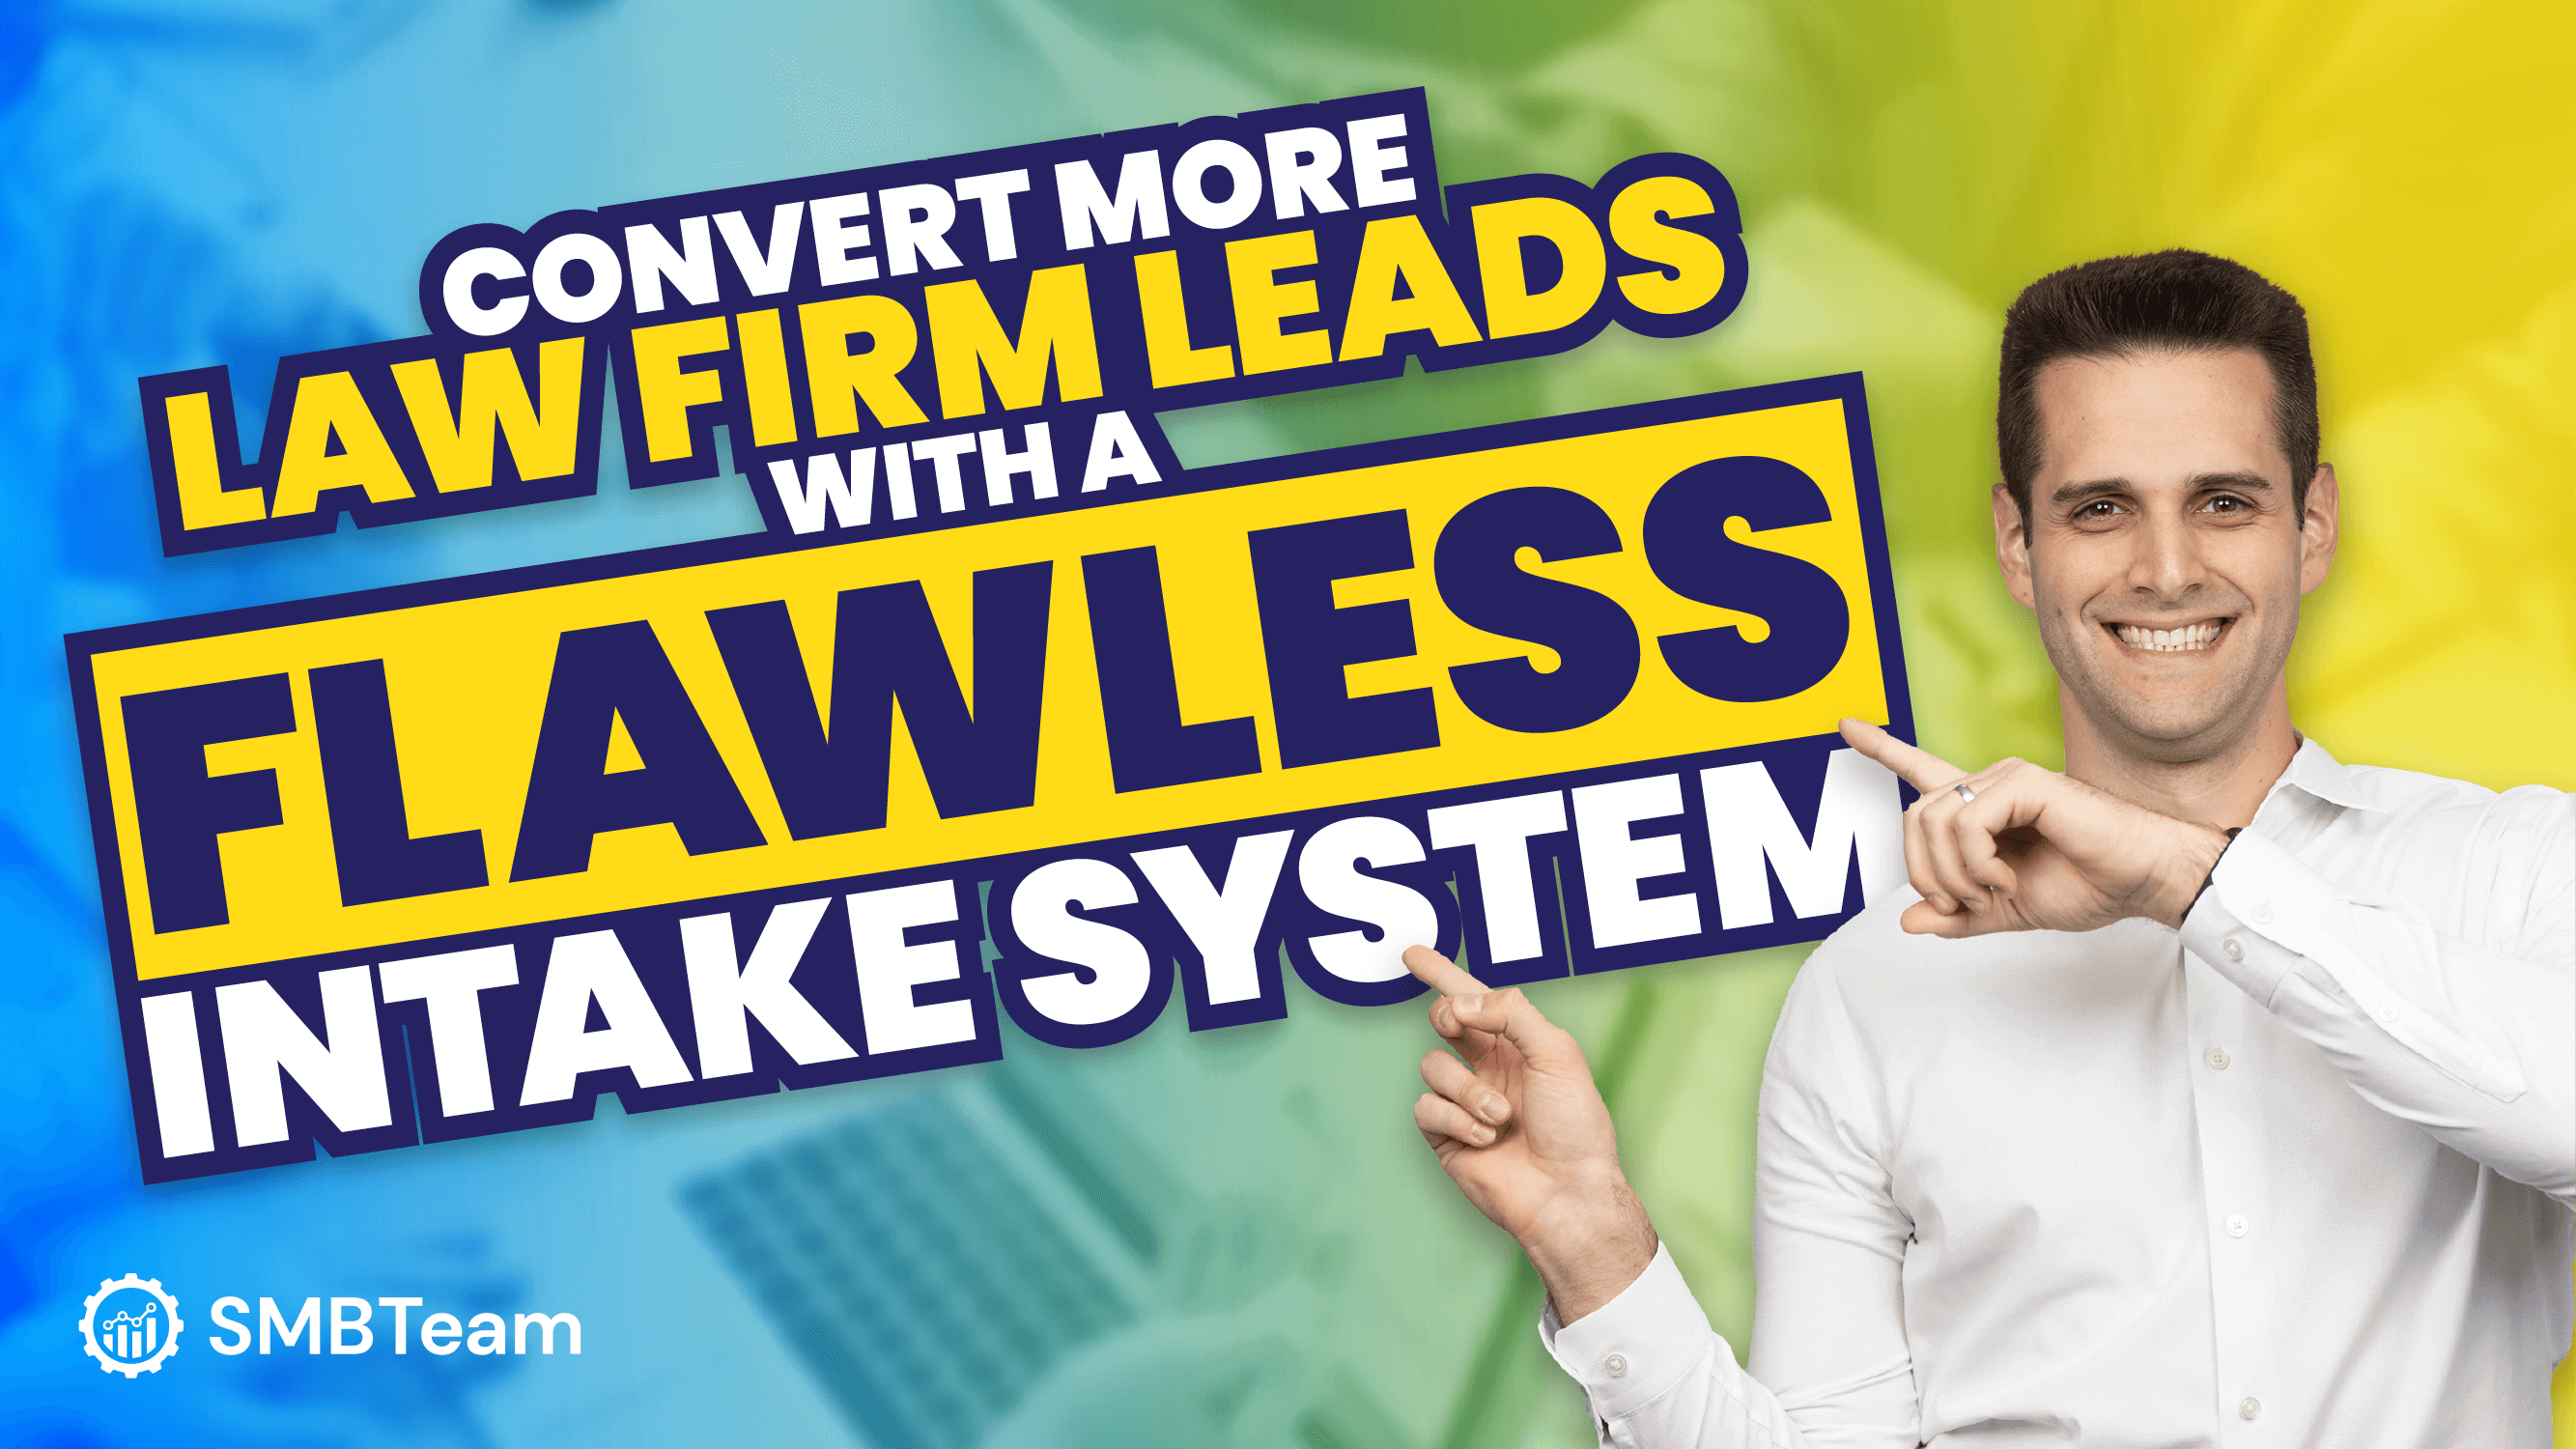 How to Create a Flawless Law Firm Intake System That Converts More Leads